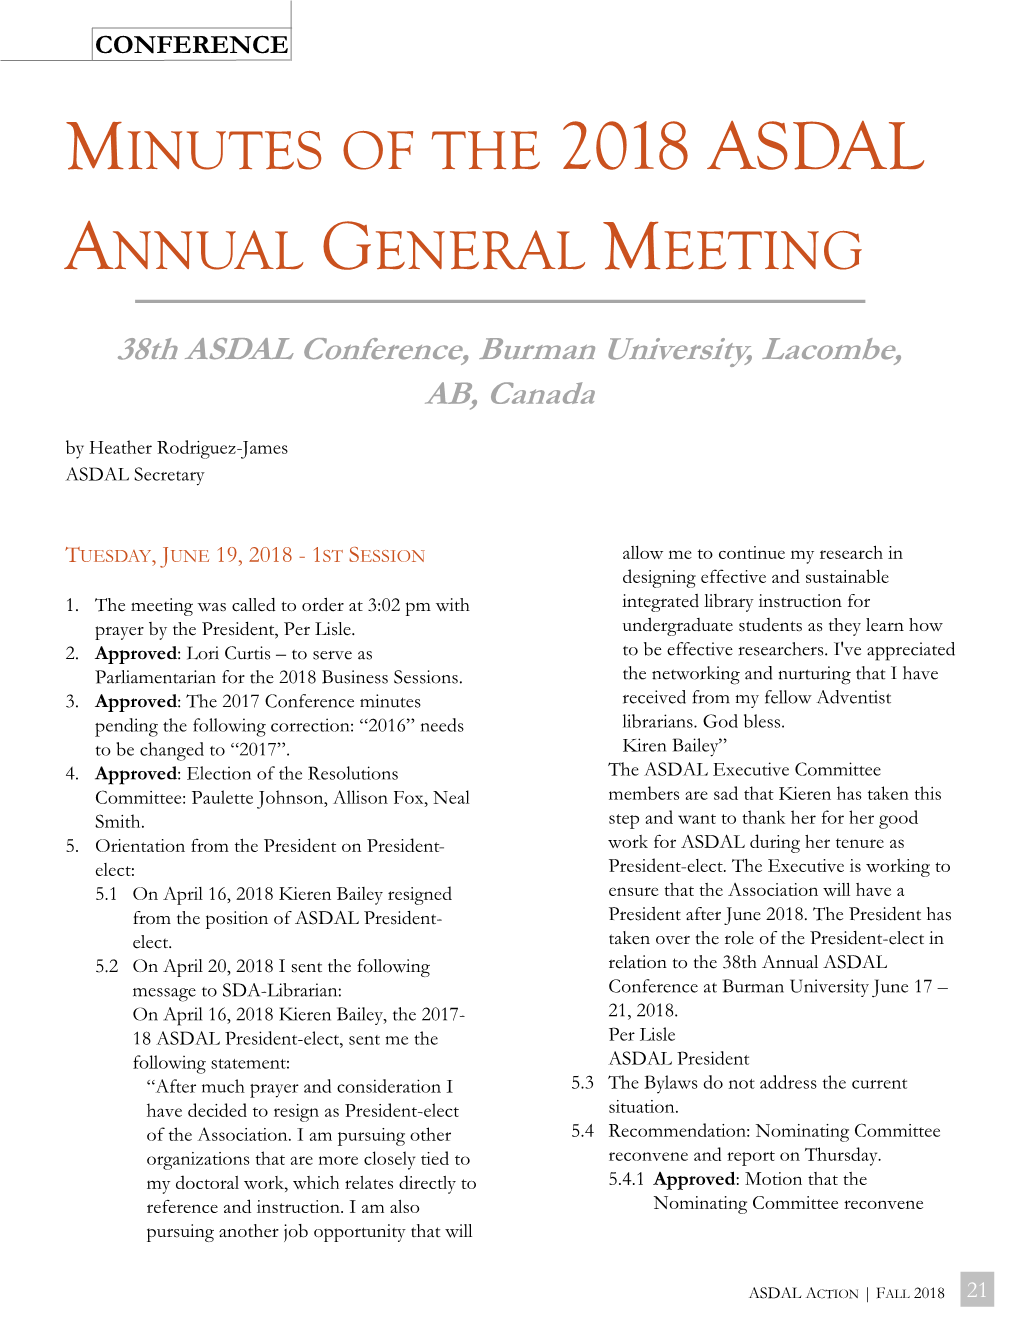 37Th Annual ASDAL Conference, 2017